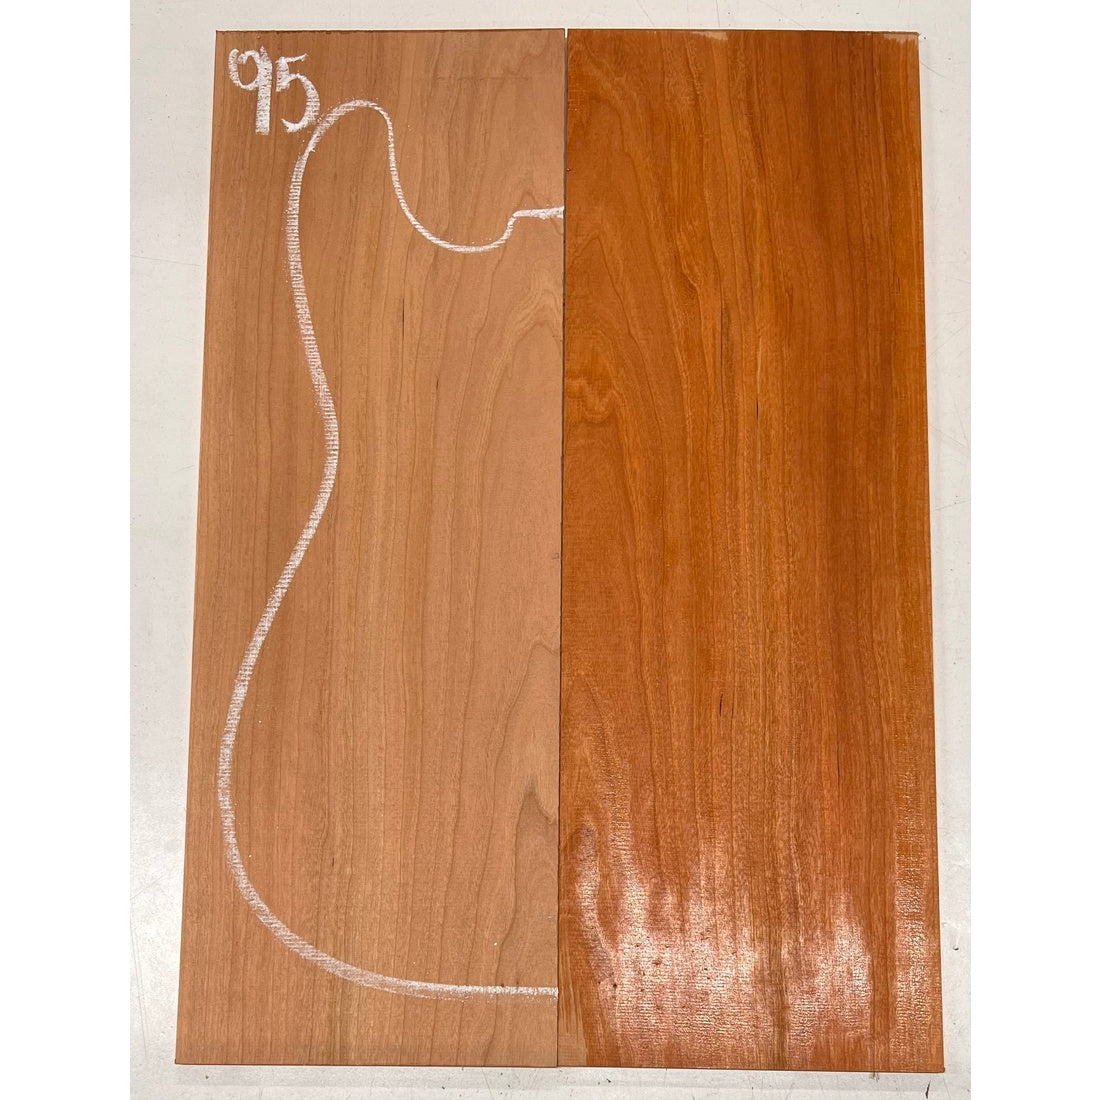 Cherry Bookmatched Guitar Drop Tops 21&quot; x 7-1/4&quot; x 1/4&quot; - Exotic Wood Zone - Buy online Across USA 